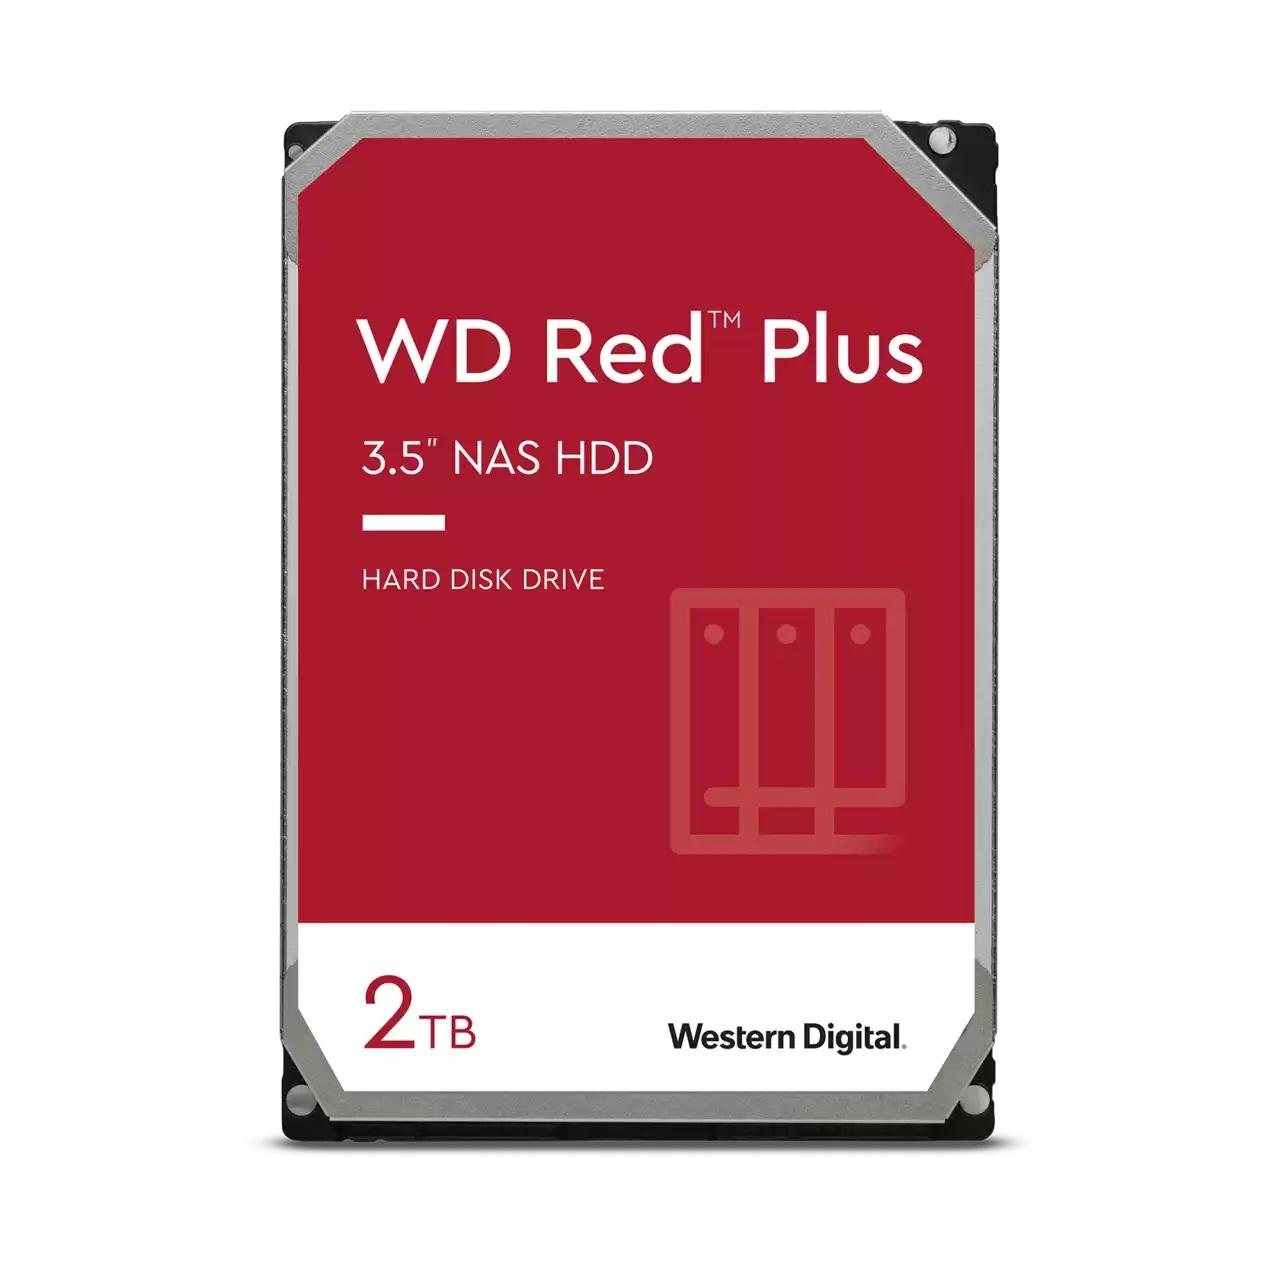 Хард диск WD Red PLUS NAS, 2TB, 5400rpm, Cache 64MB, SATA 3